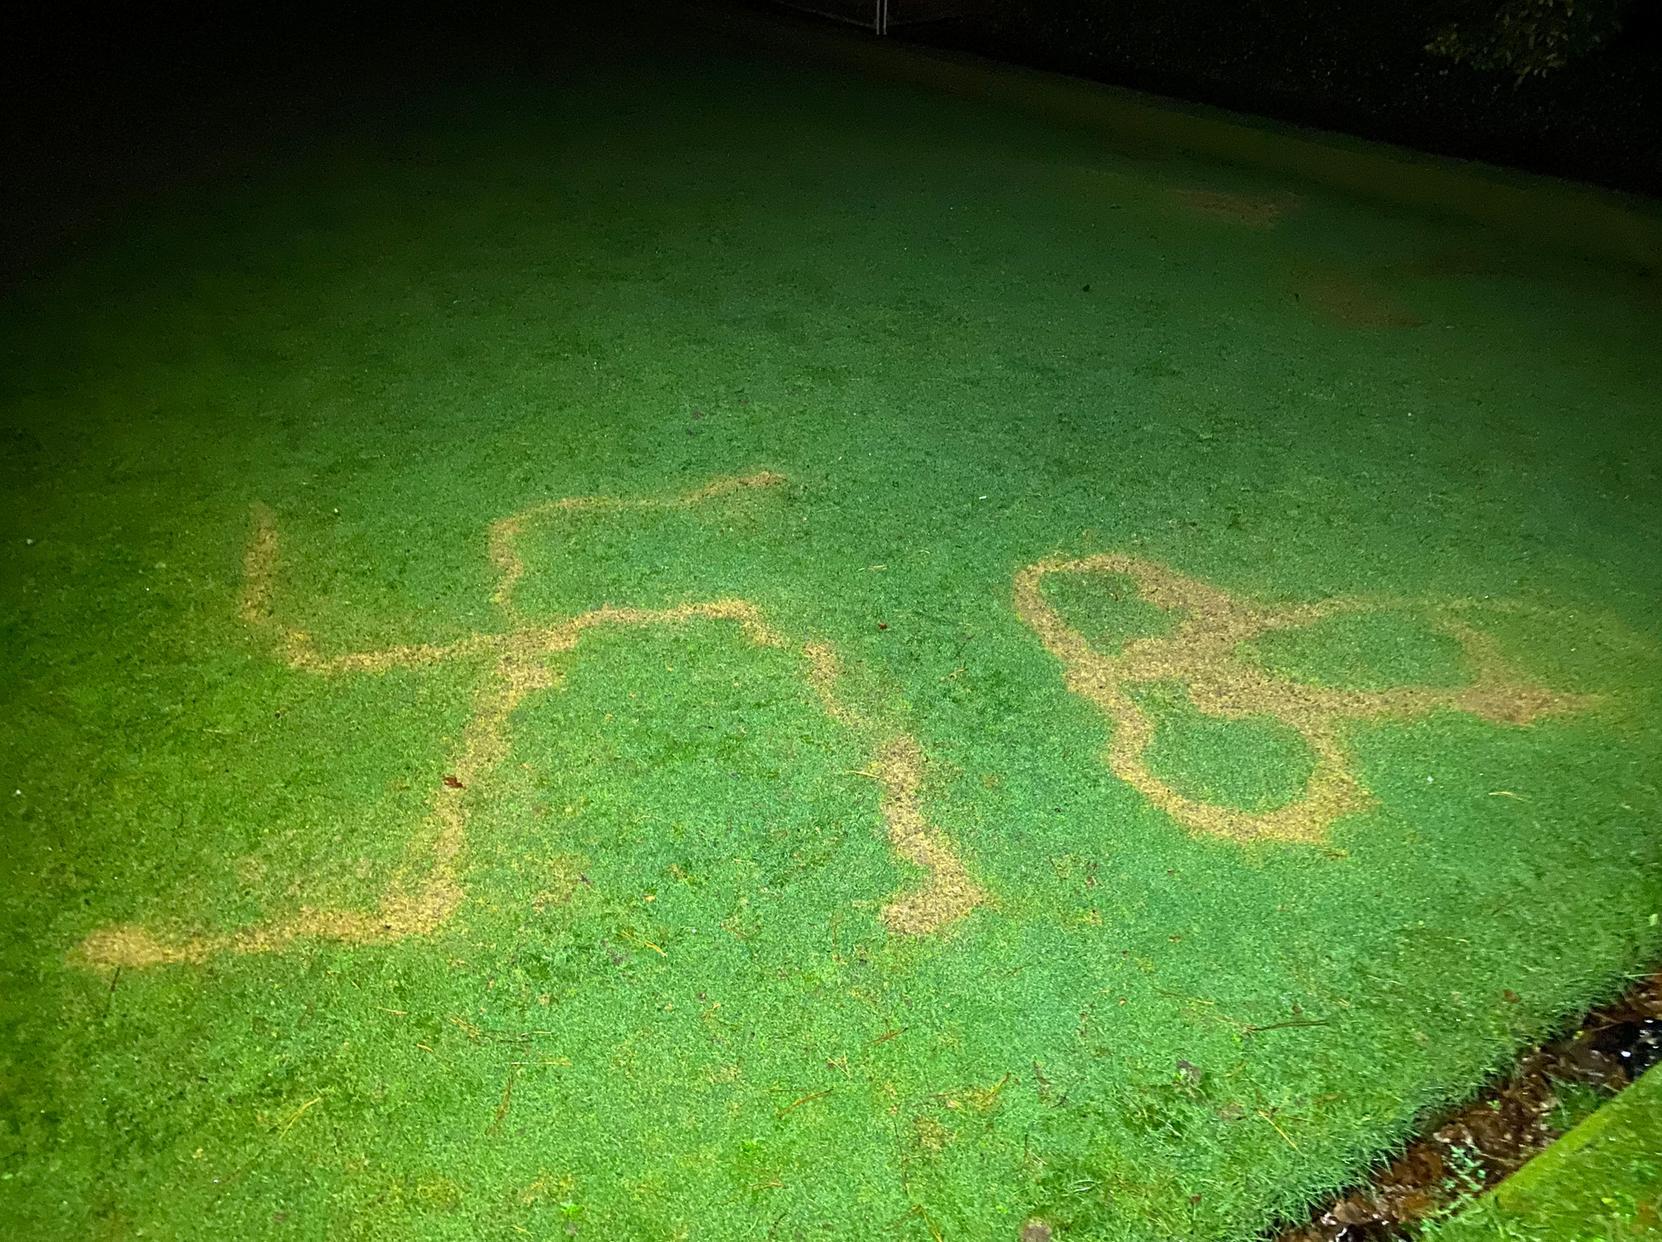 Church House Grounds in Tarring has been vandalised